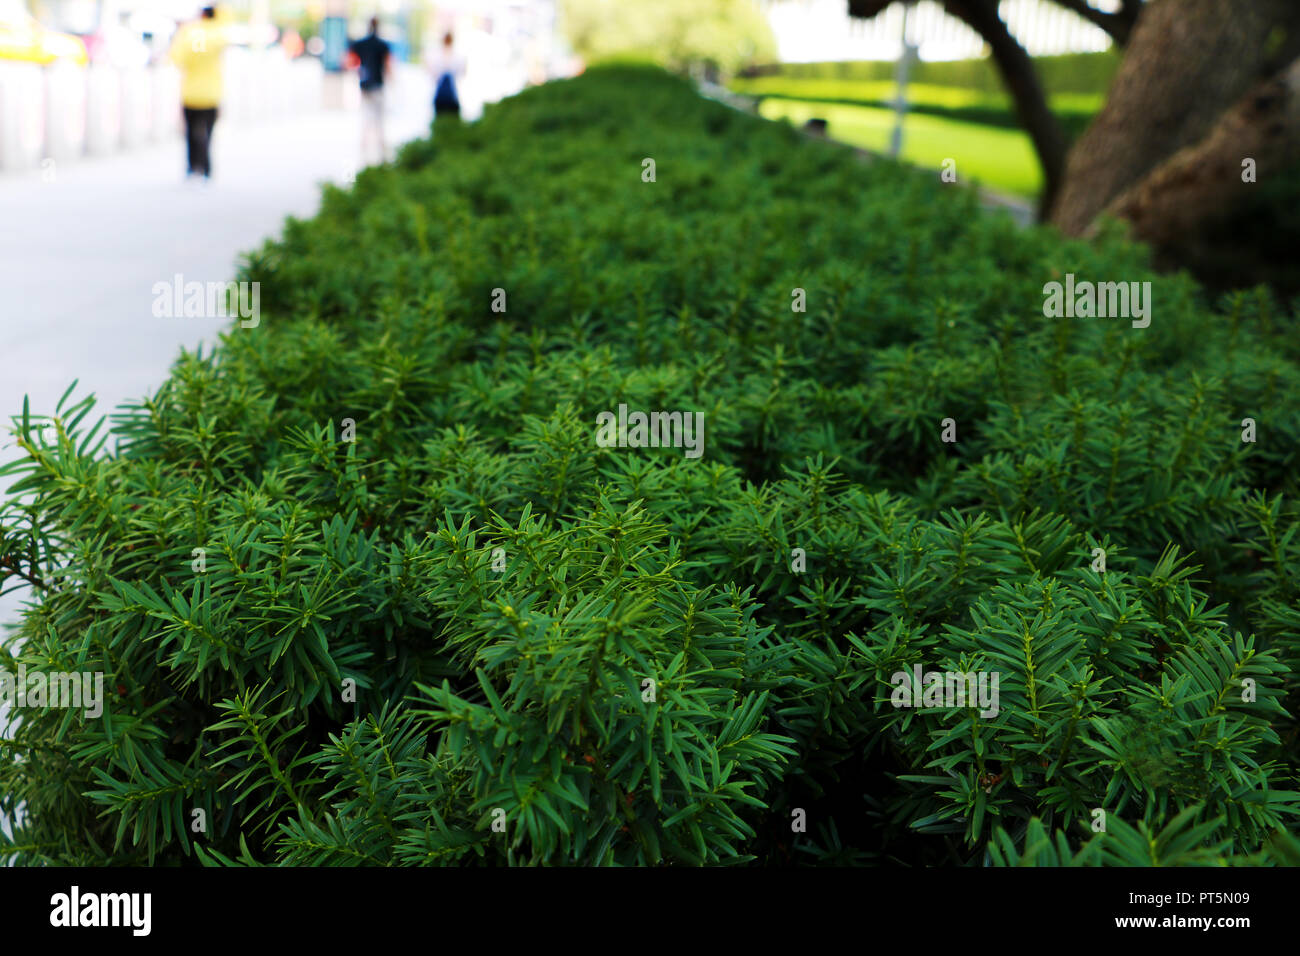 Nature background with green needle-like juniper leaves. Stock Photo